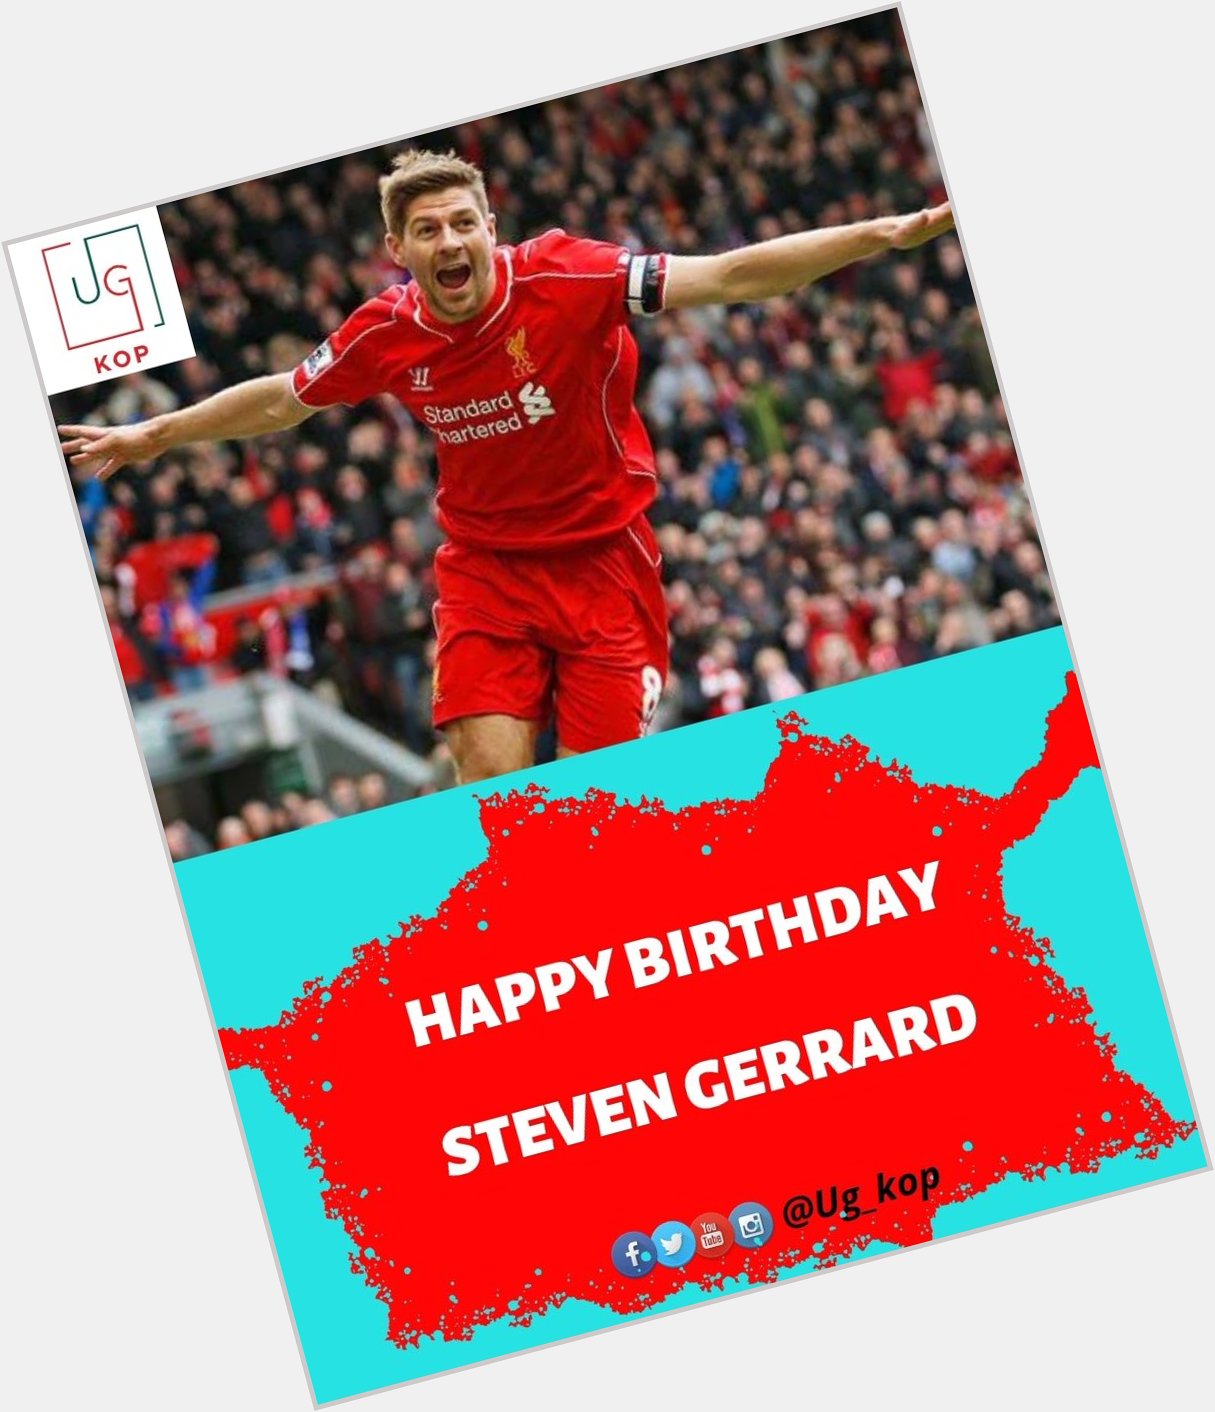 Happy birthday Steven Gerrard, we wish you the very best in all that you do. 